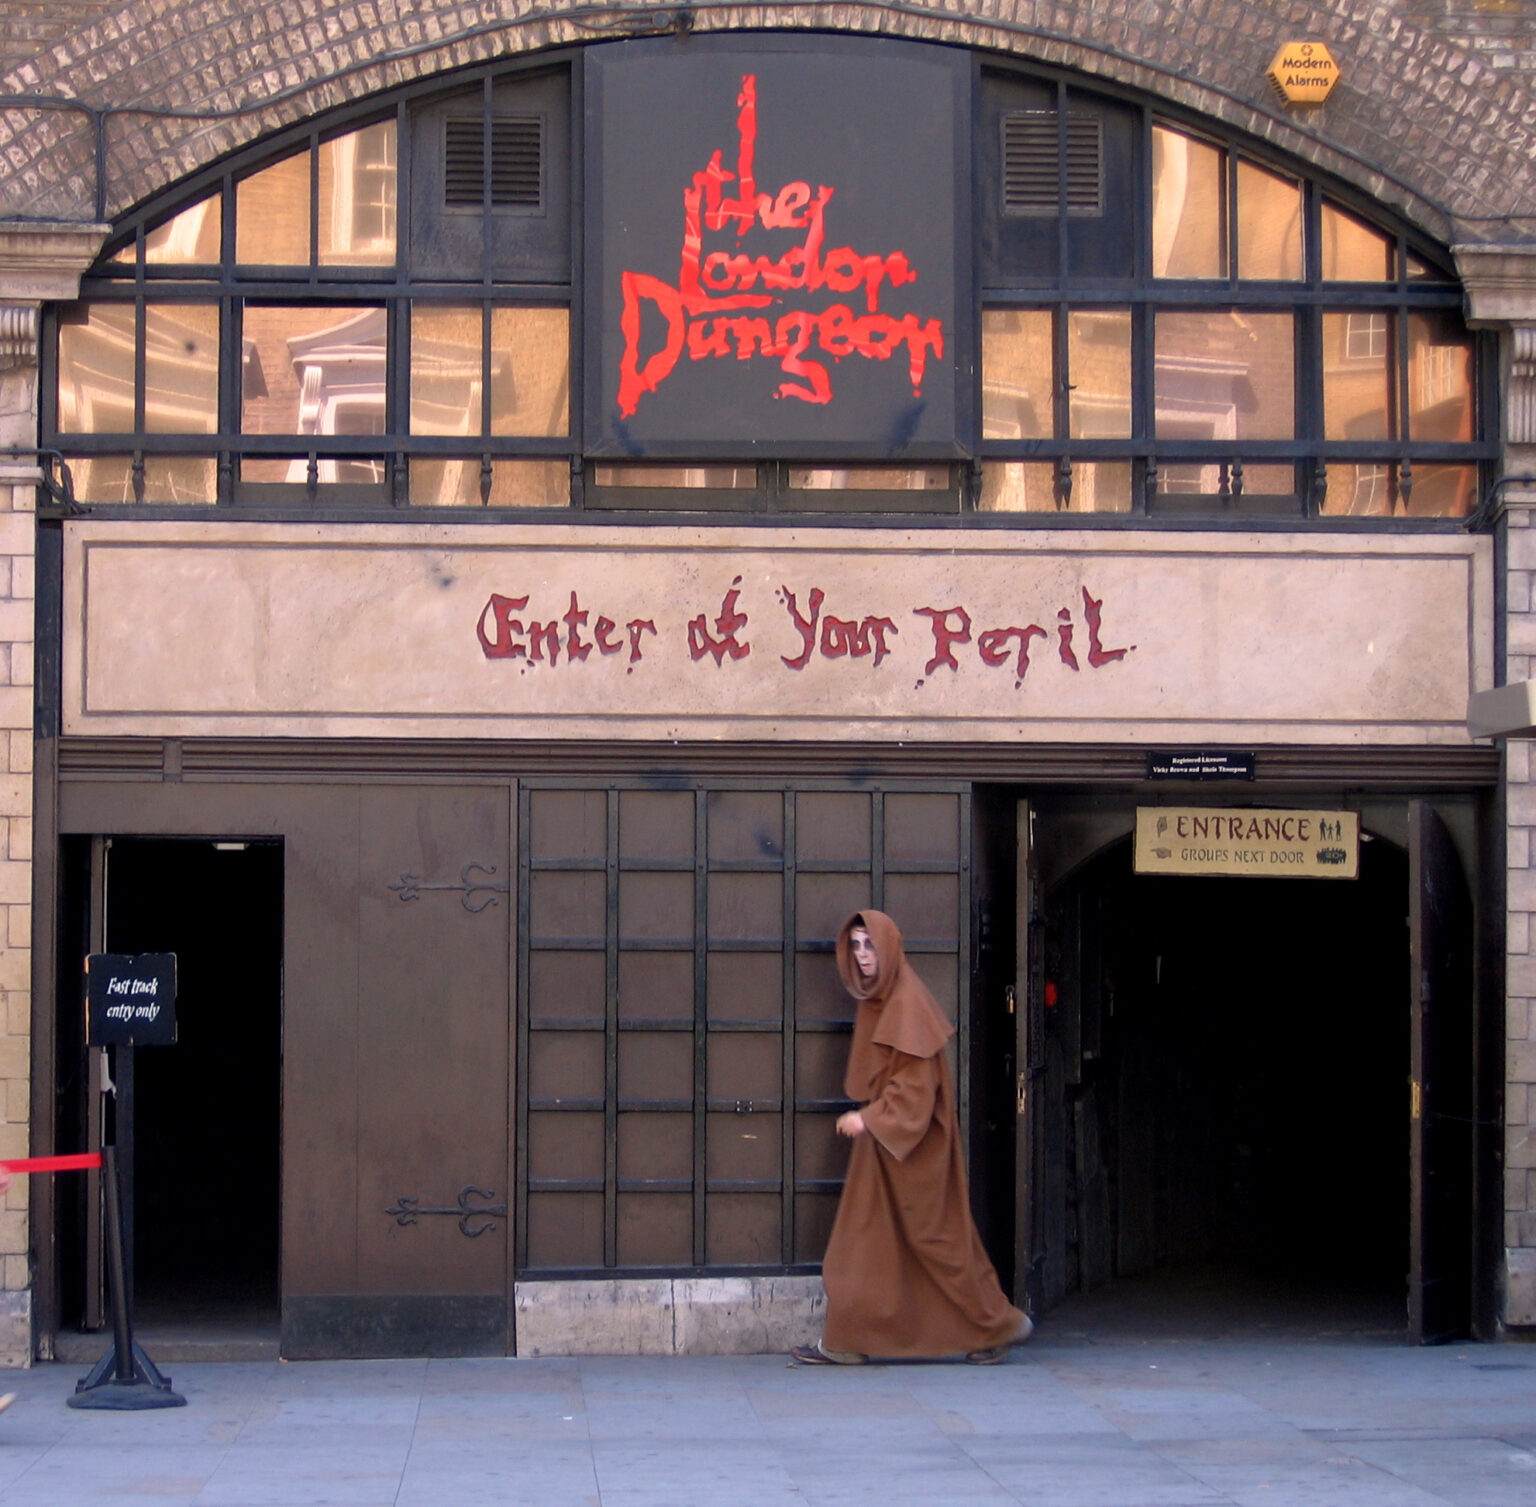 Do you share your name with a famous serial killer? The London Dungeon may have a deal for you! Learn about their macabre promotion and its controversy.